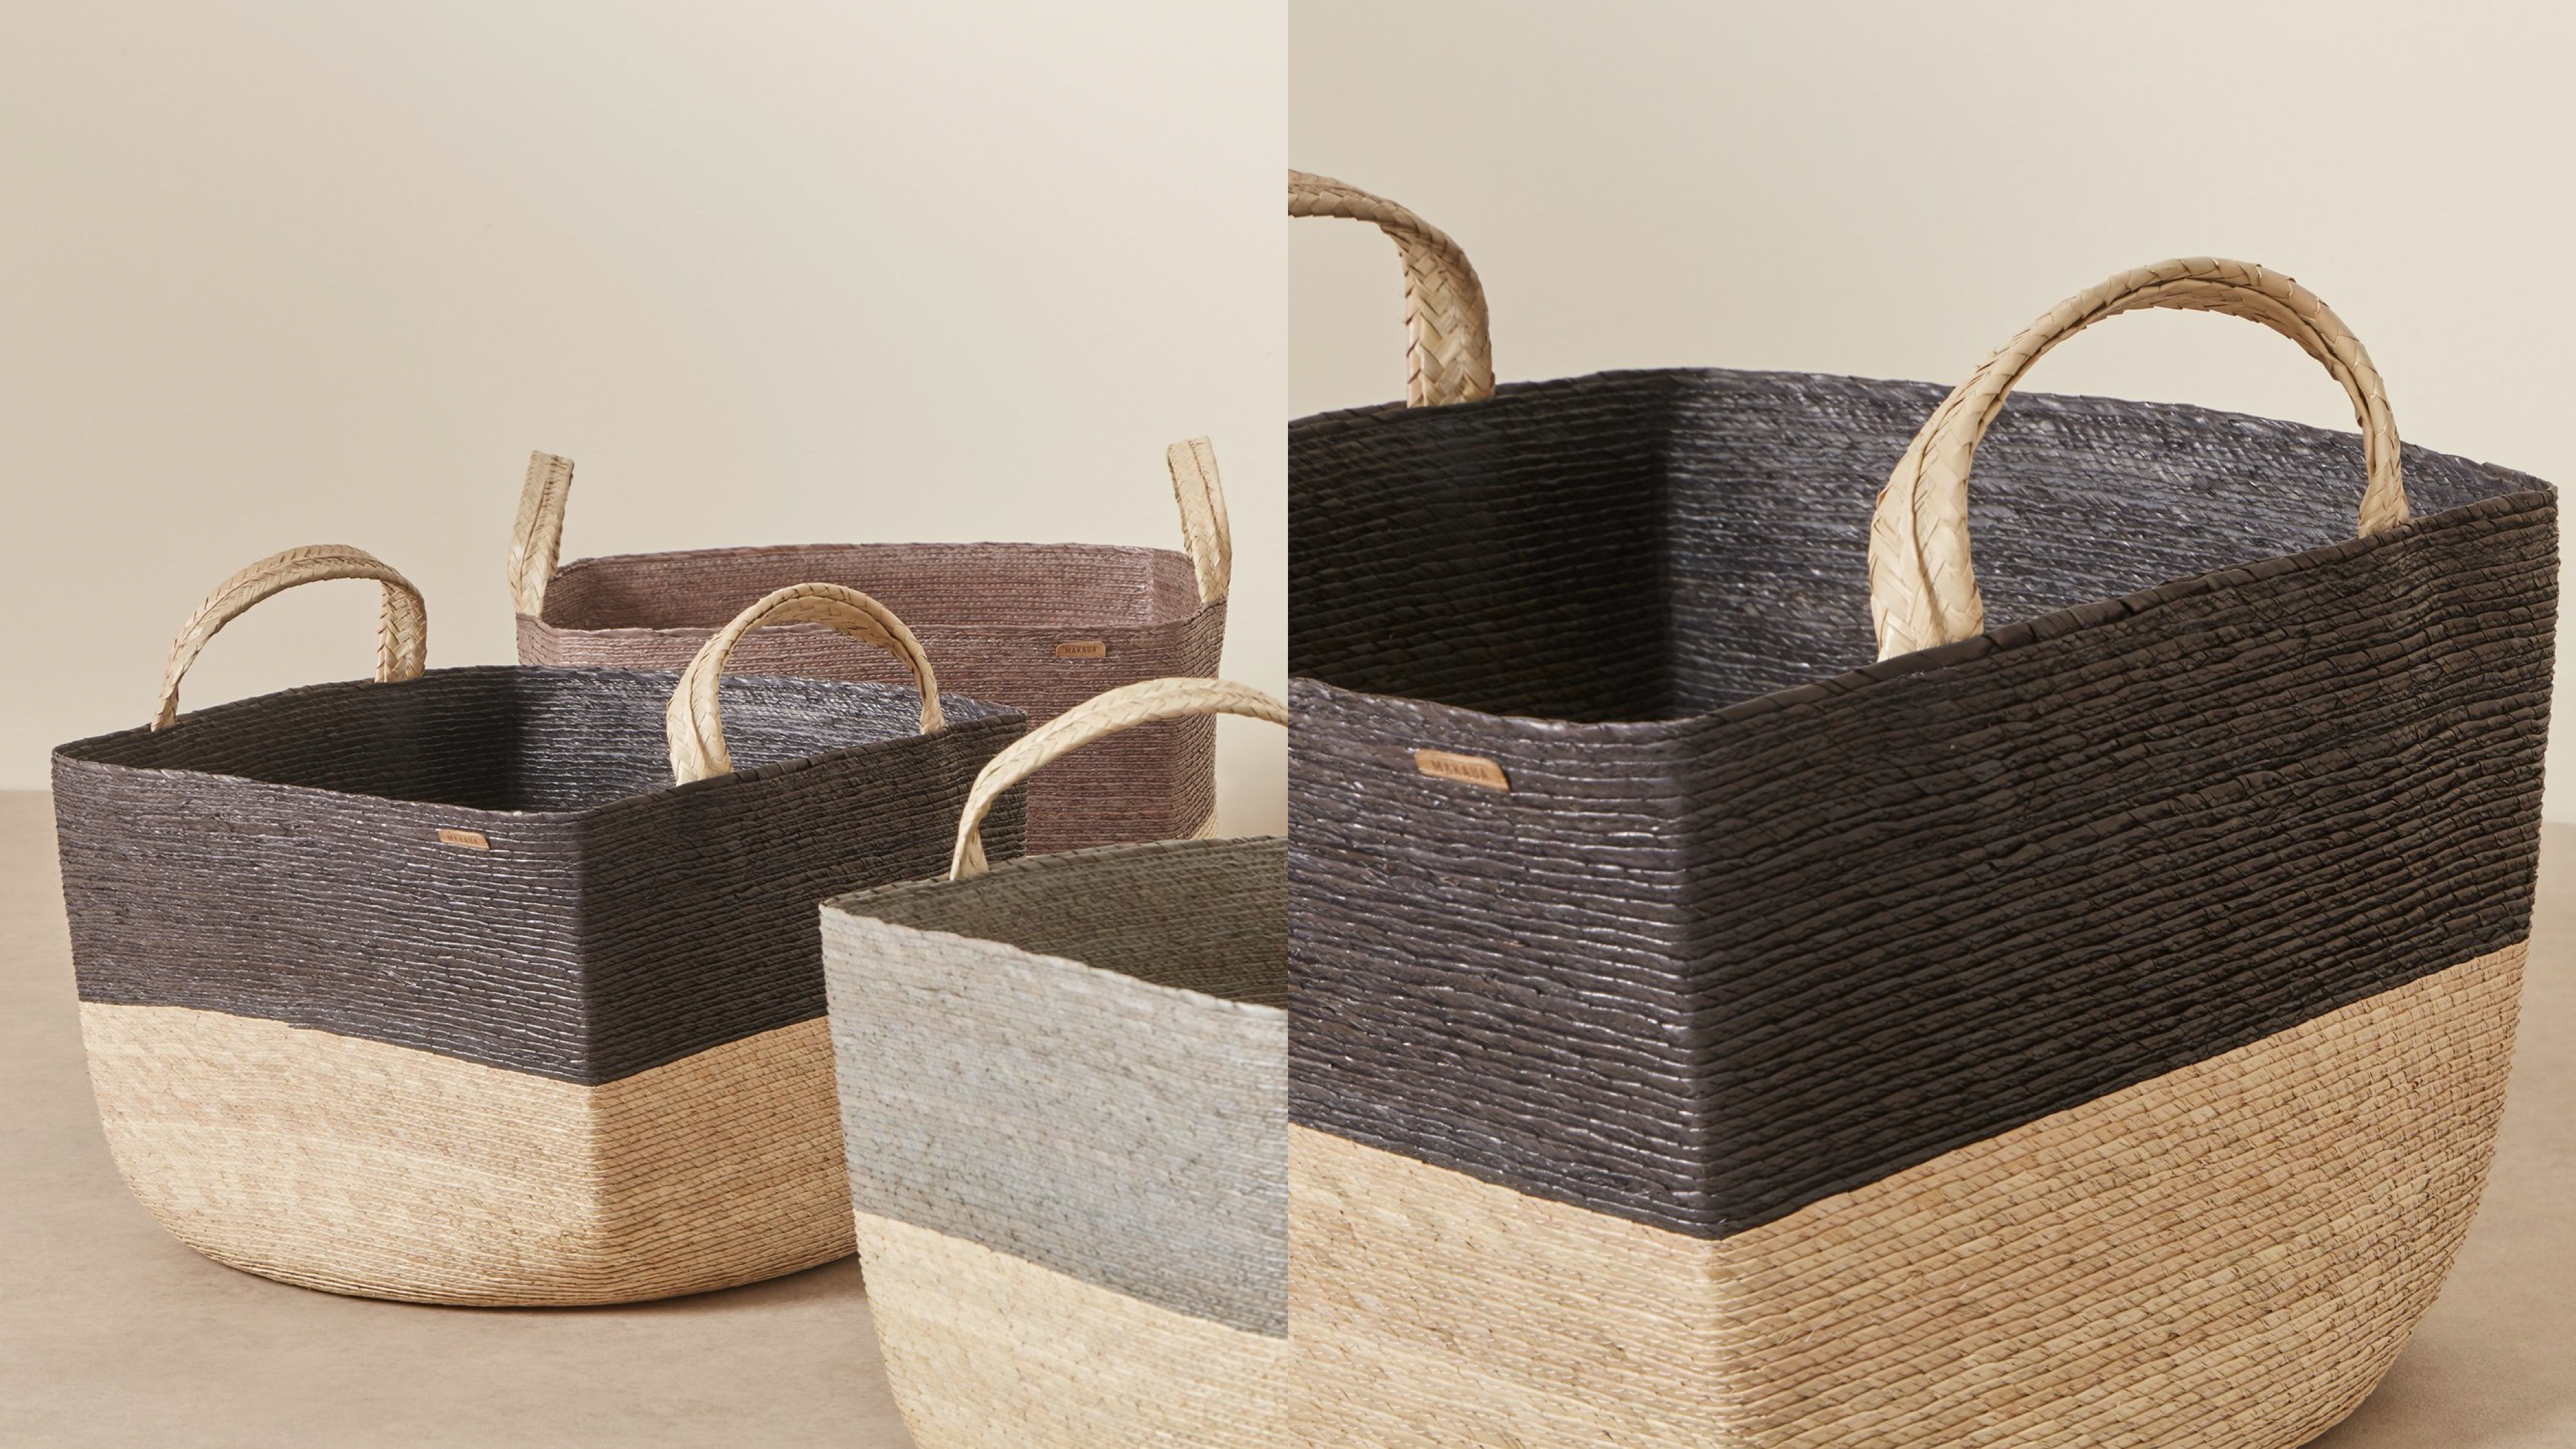 hand-woven fiber baskets for extra storage space